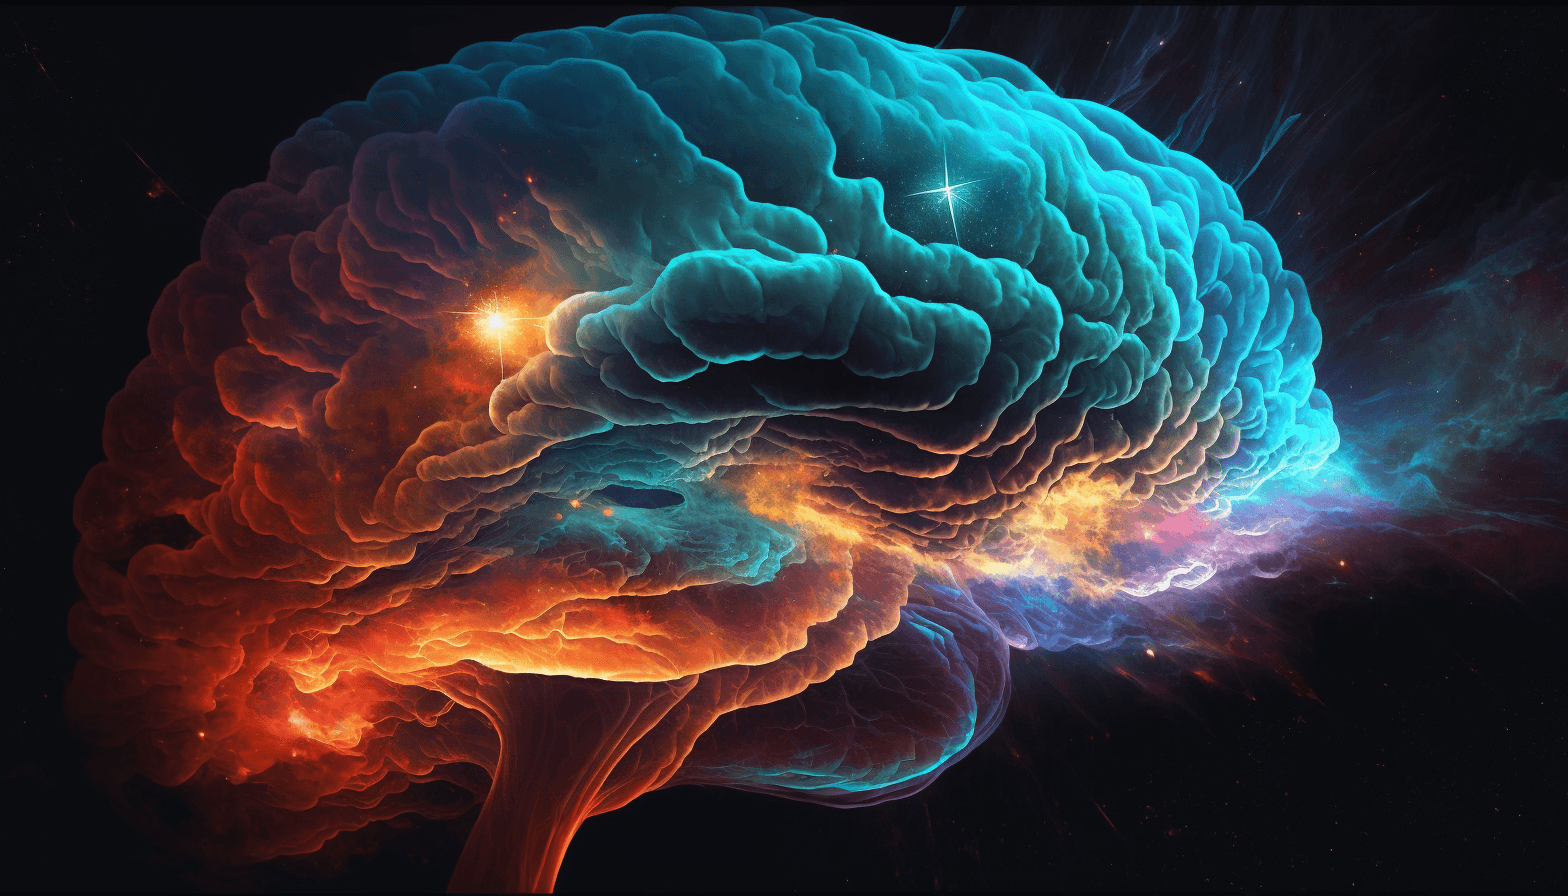 whole universe in shape of a human brain